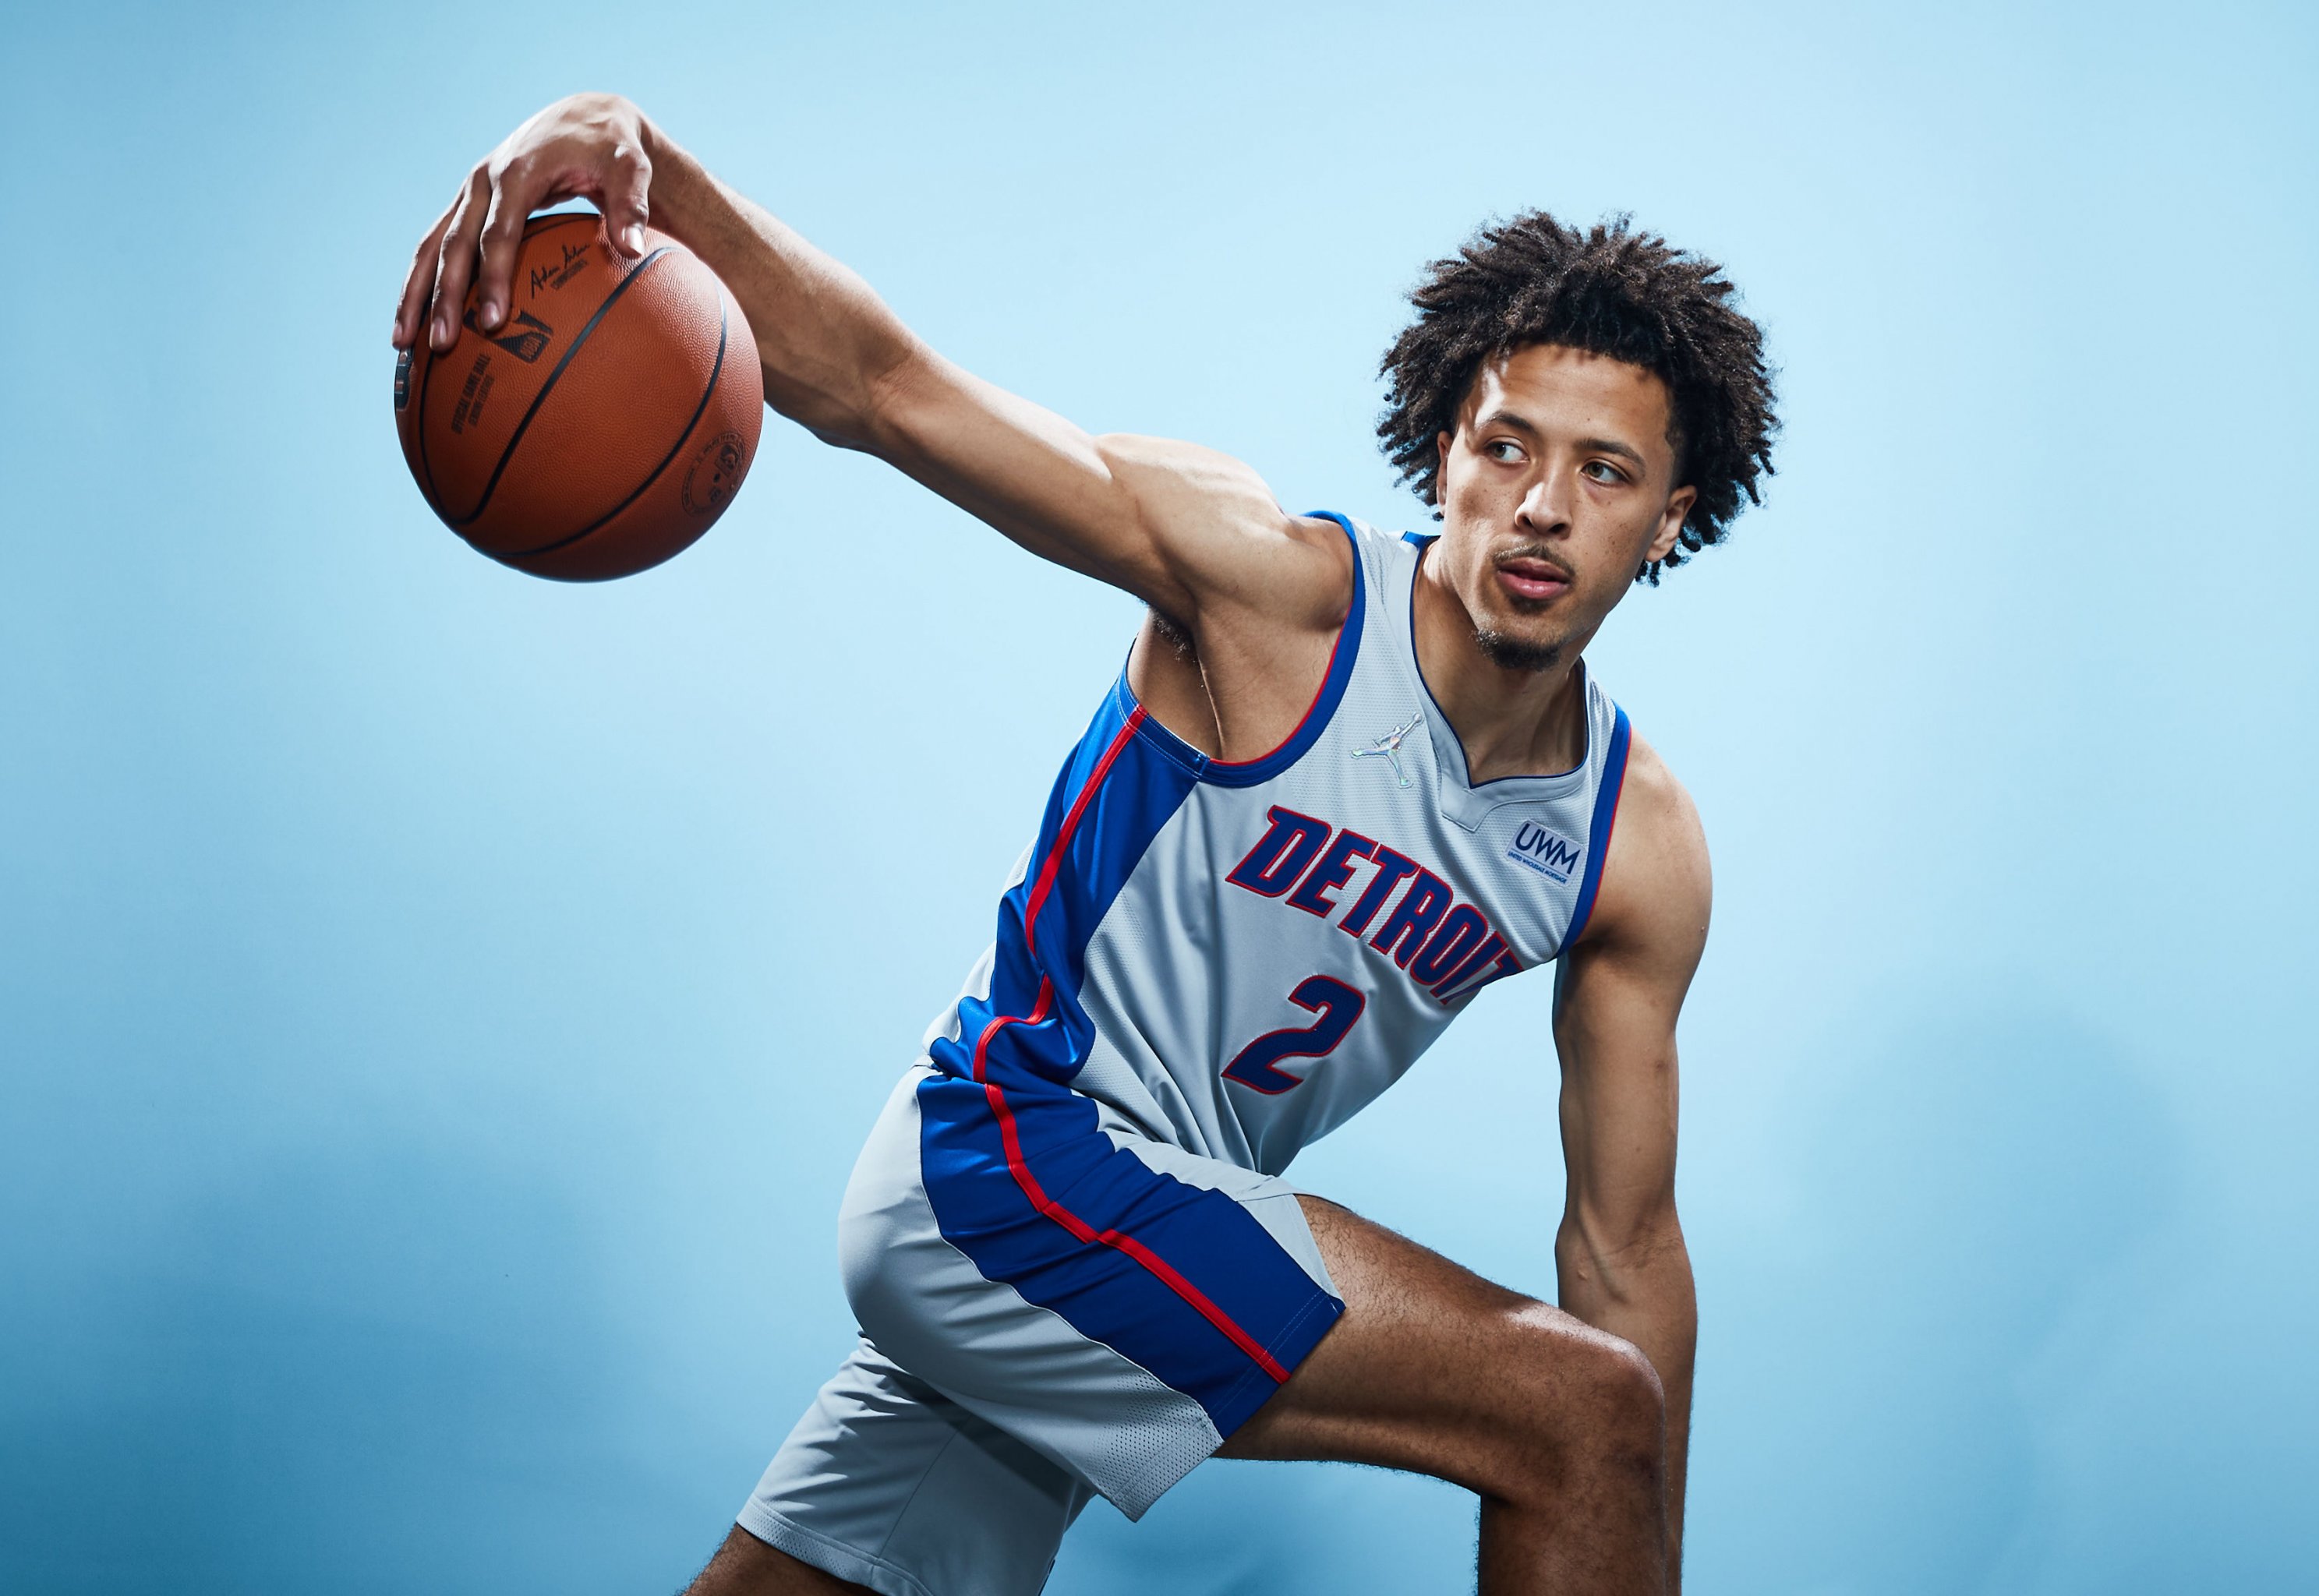 Detroit Pistons' tantalizing teal jerseys could hit court again in 2022